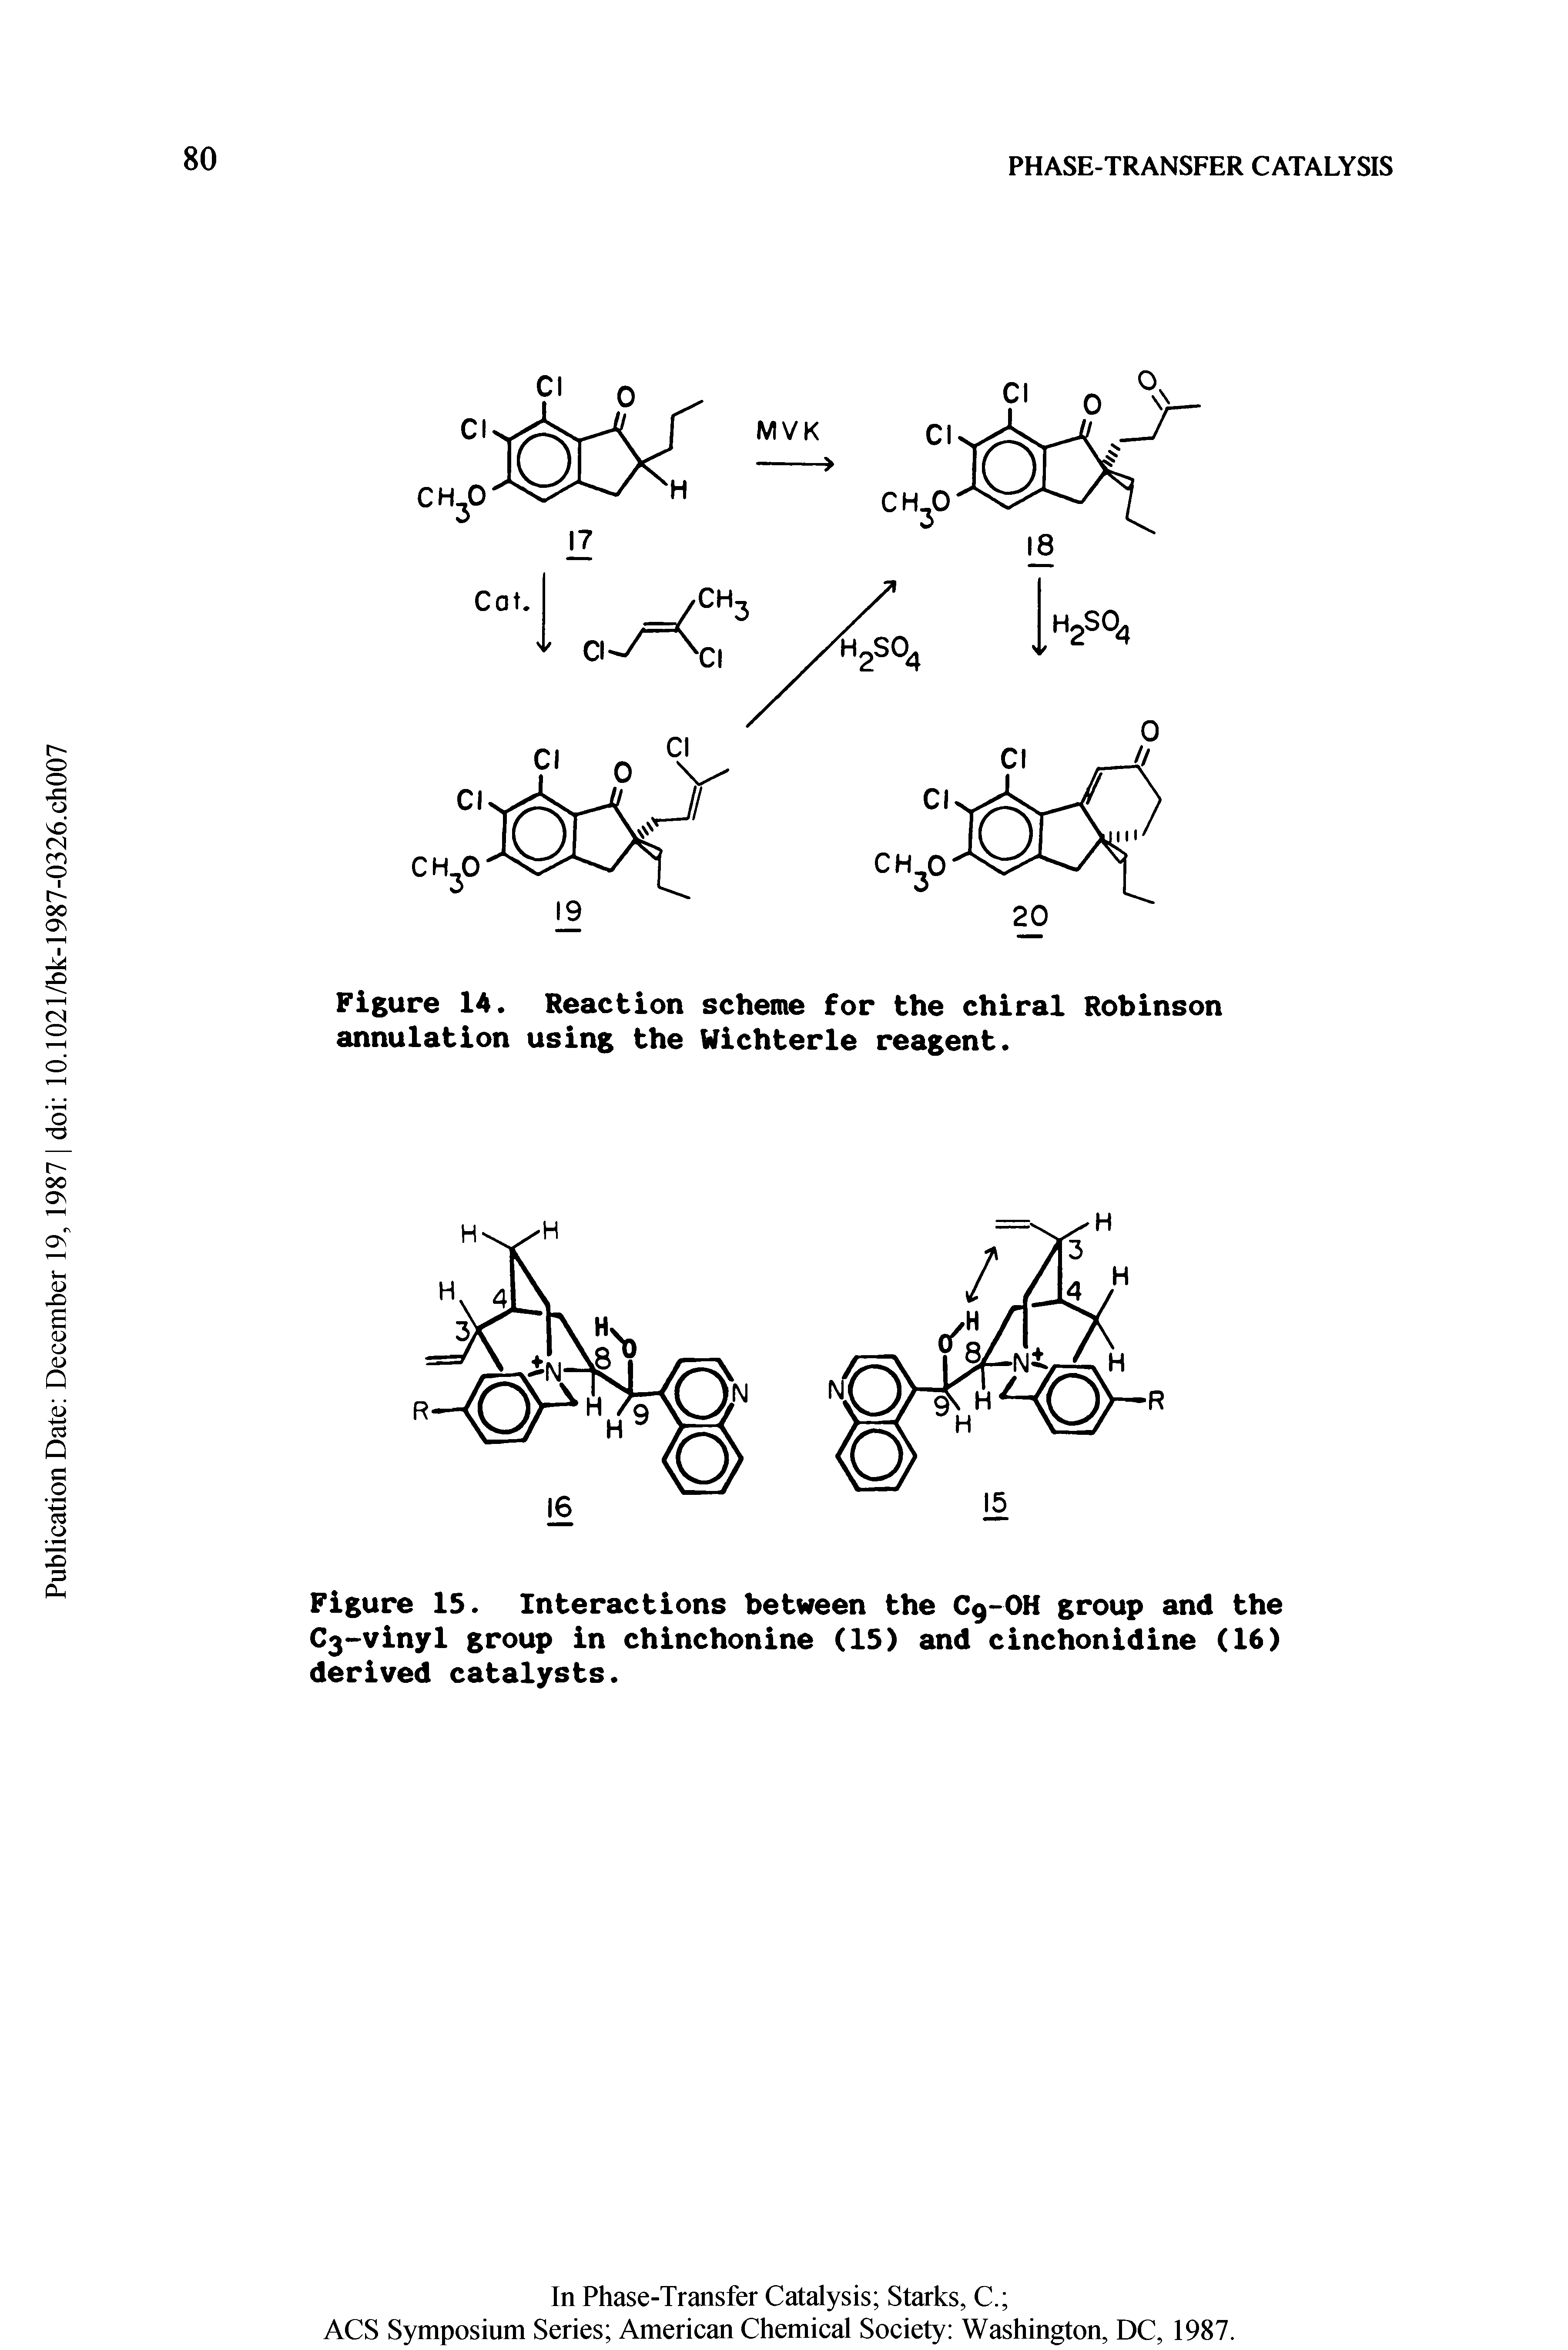 Figure 14. Reaction scheme for the chiral Robinson annulation using the Wichterle reagent.